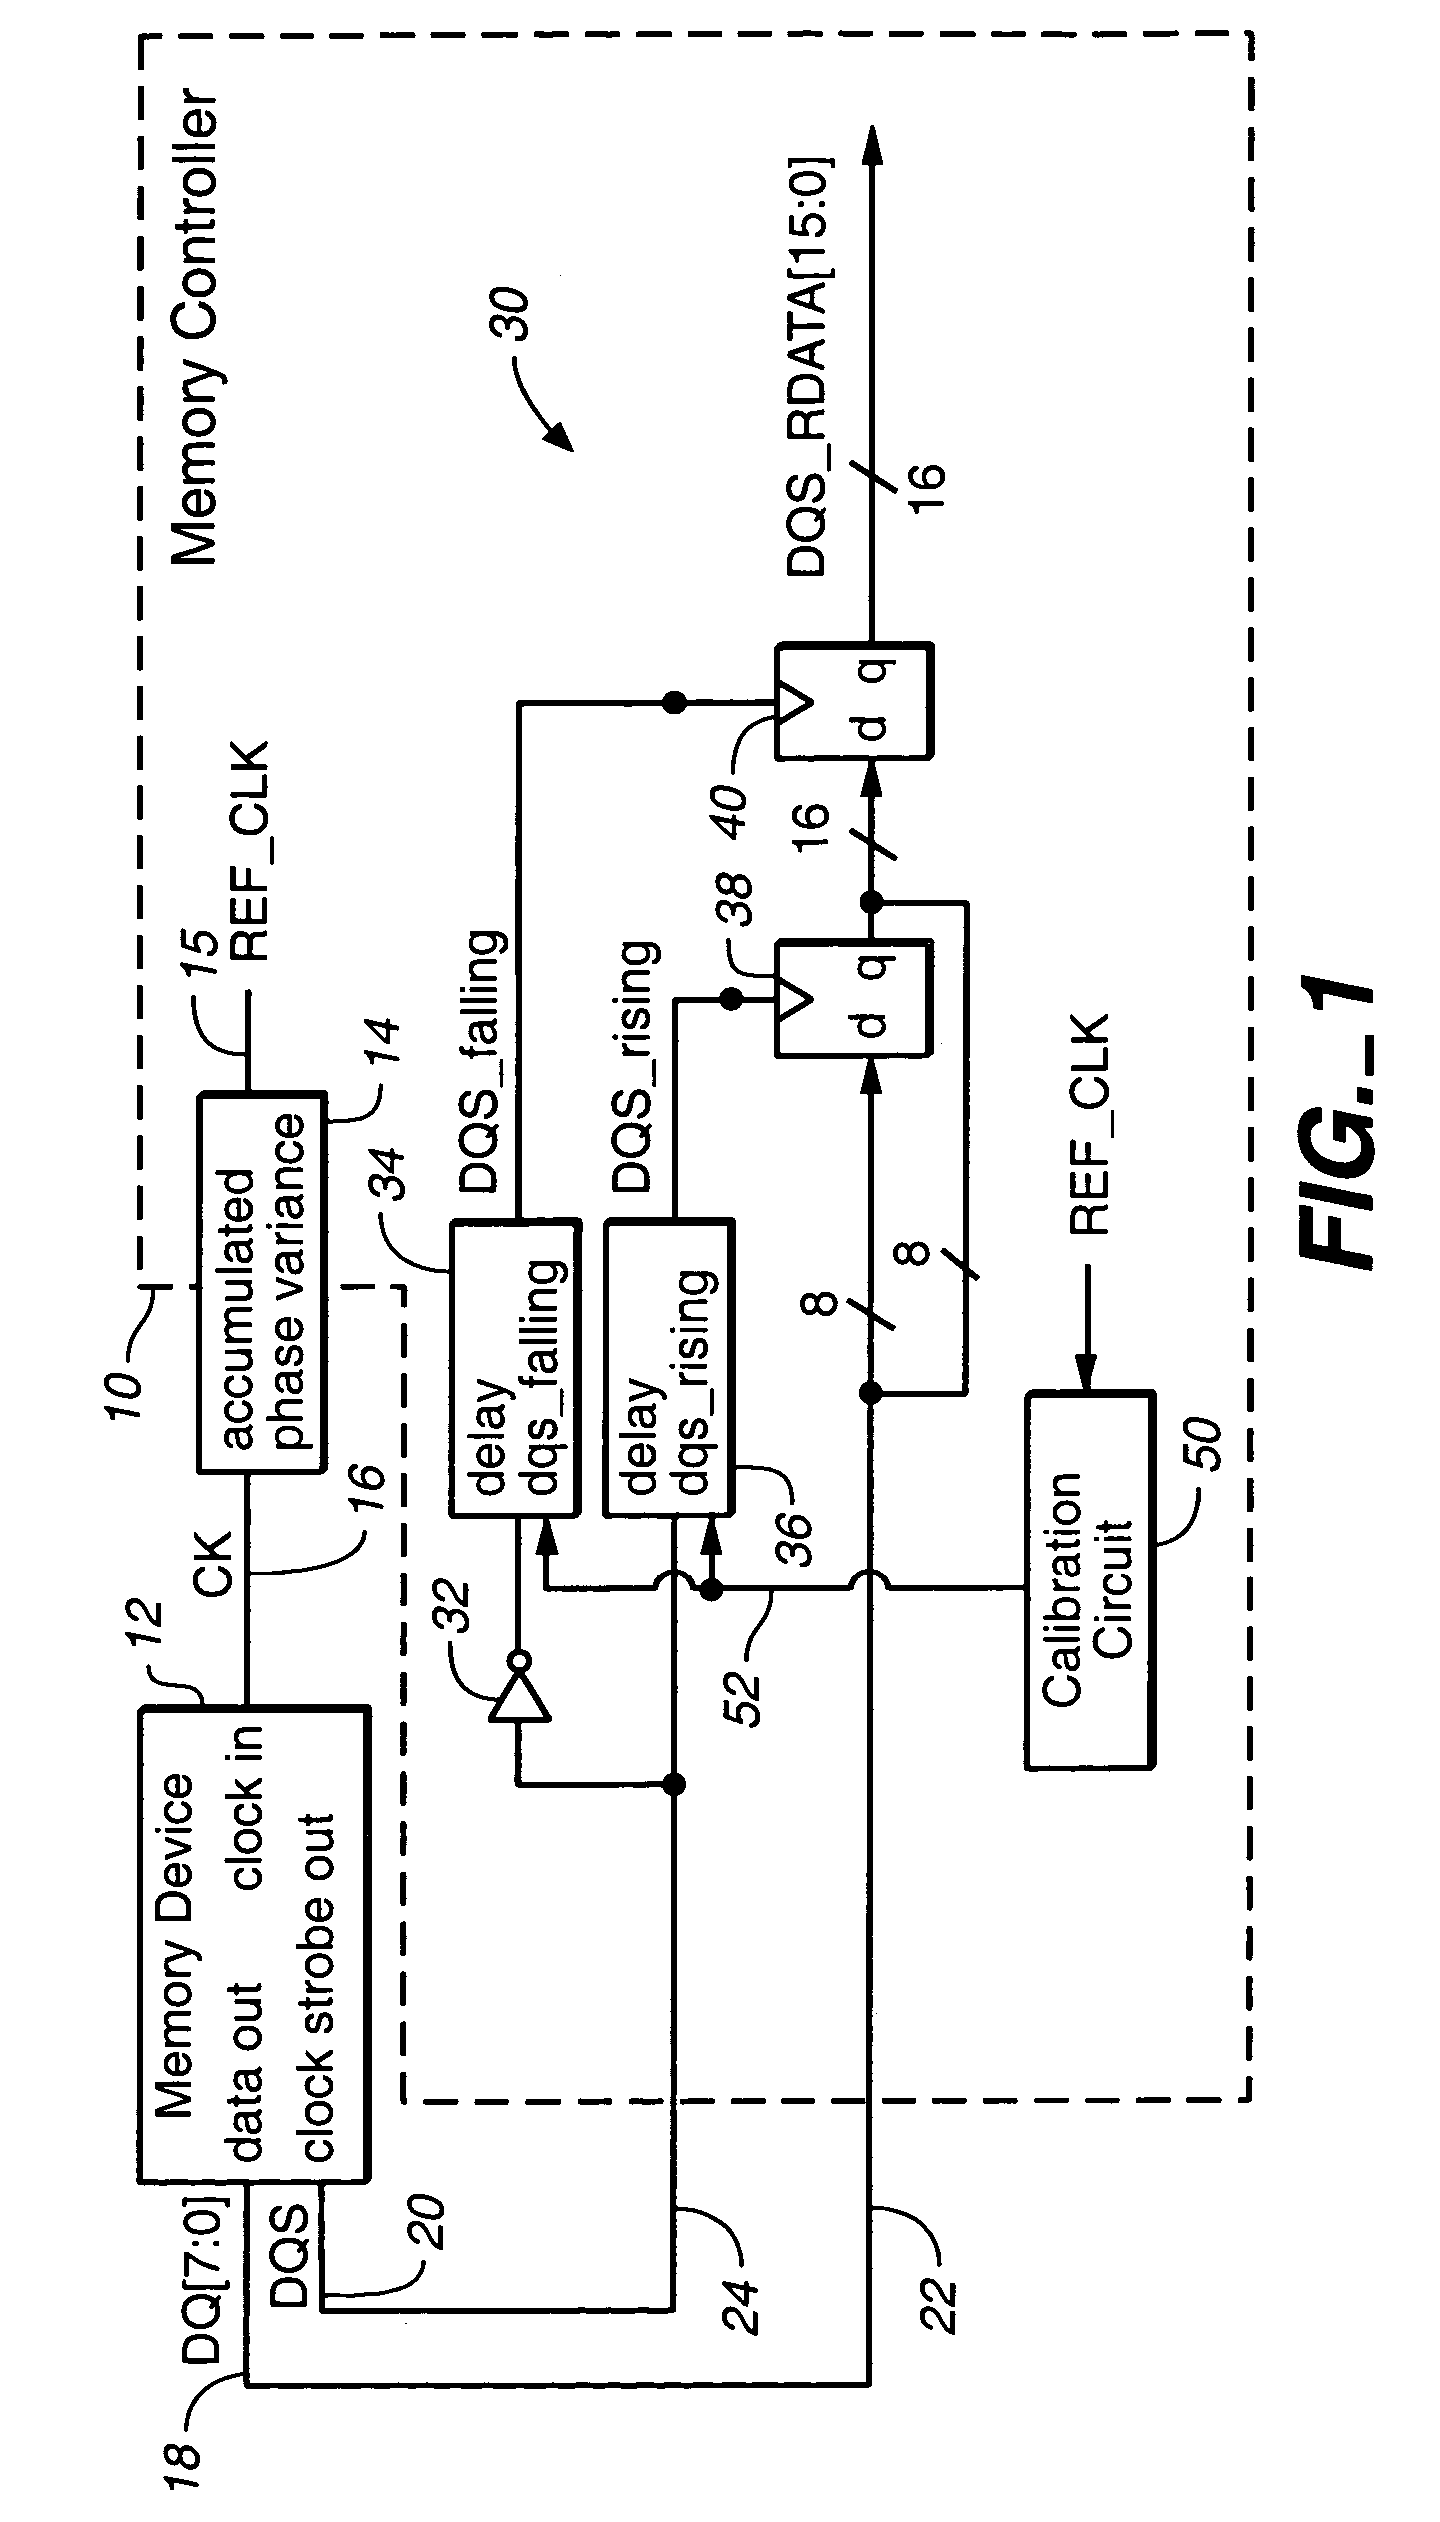 Method and apparatus for calibrating a delay line